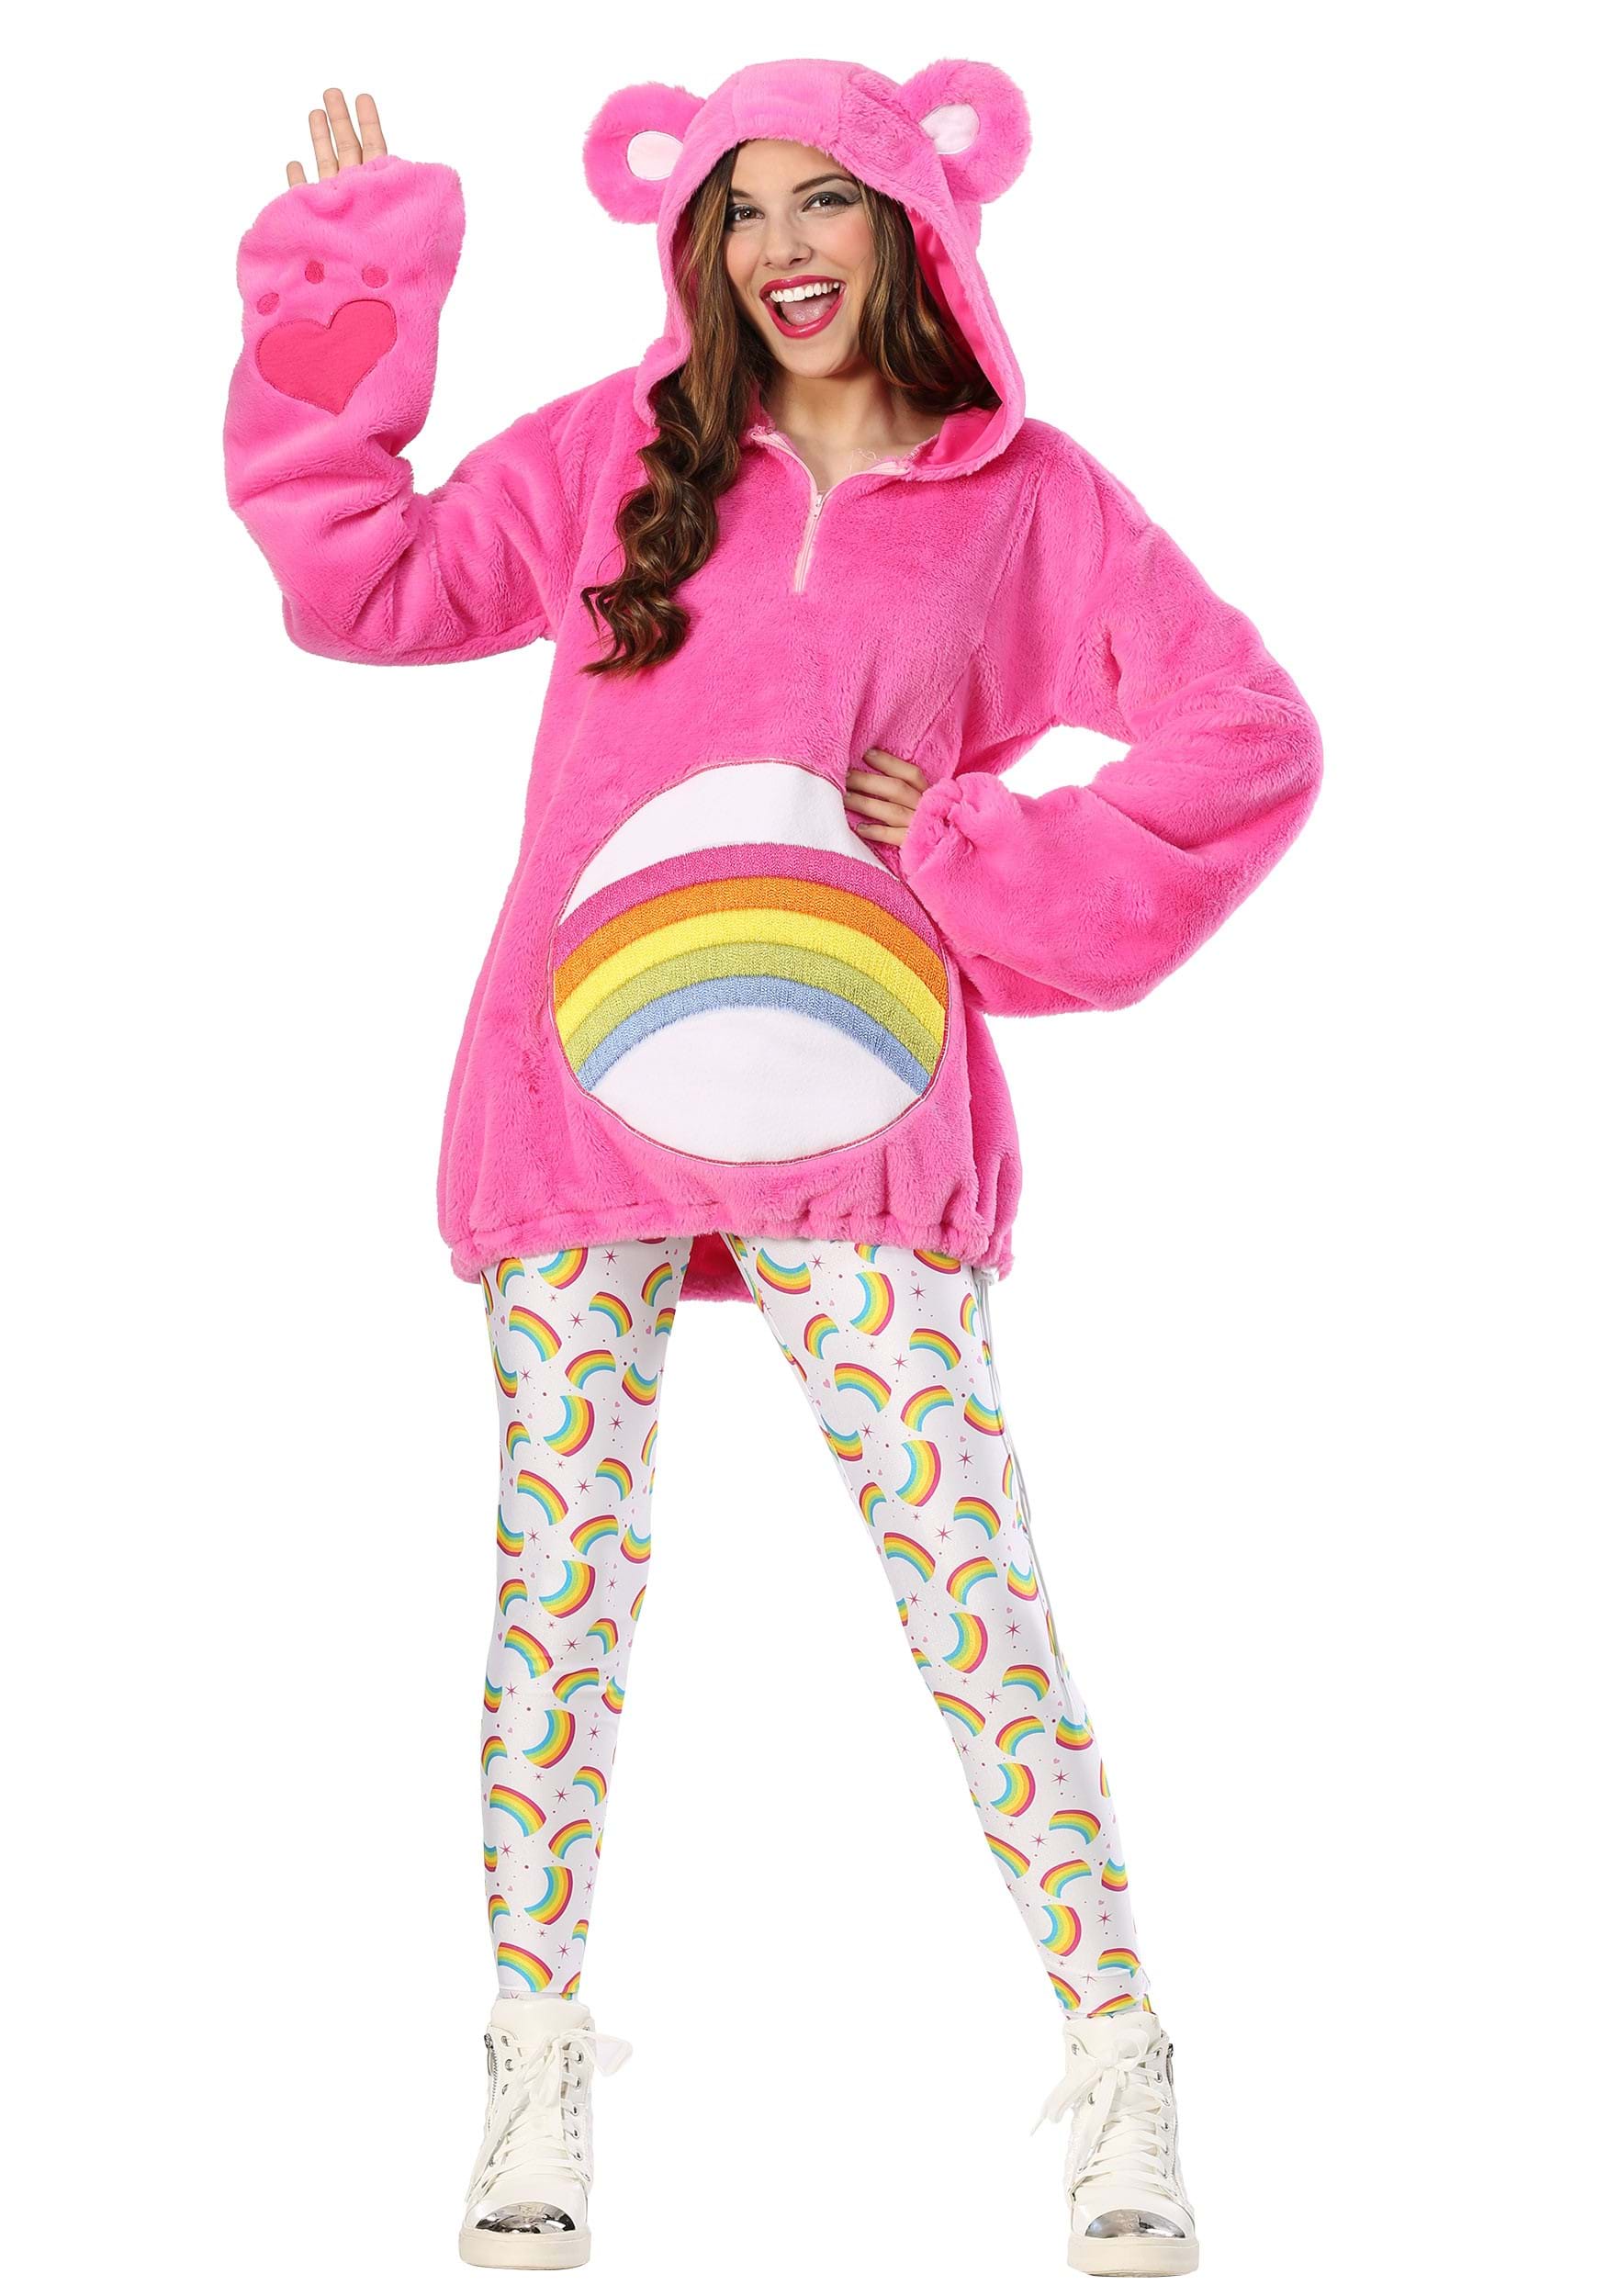 Photos - Fancy Dress CARE FUN Costumes  Bears Deluxe Cheer Bear Hoodie Costume for Women Pink 